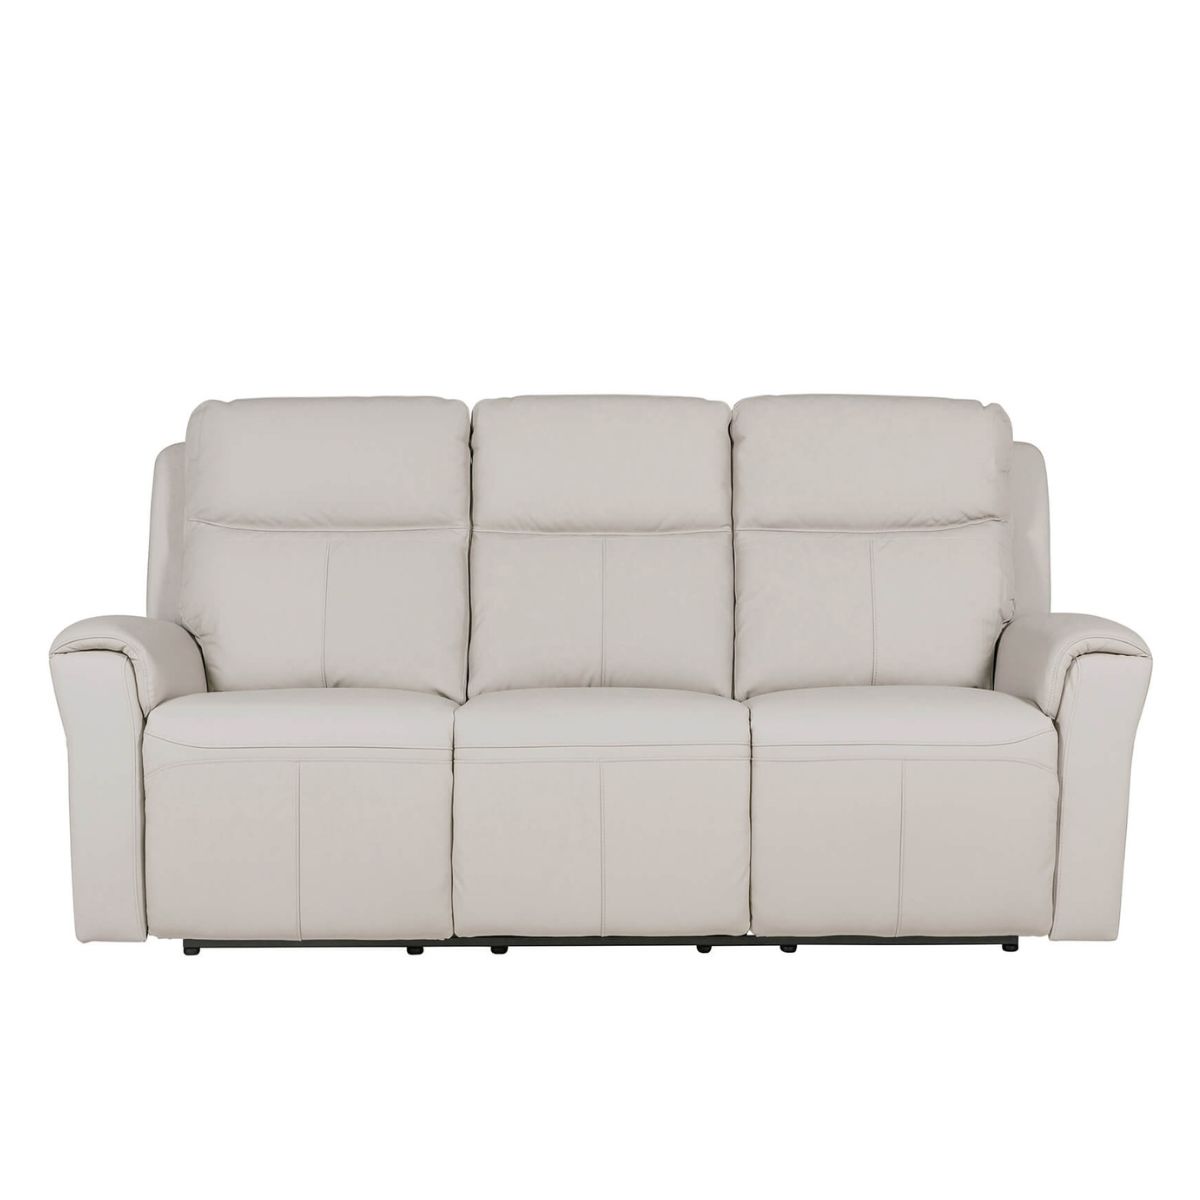 Rosslare Leather 3 Seater Electric Recliner Beige - 3